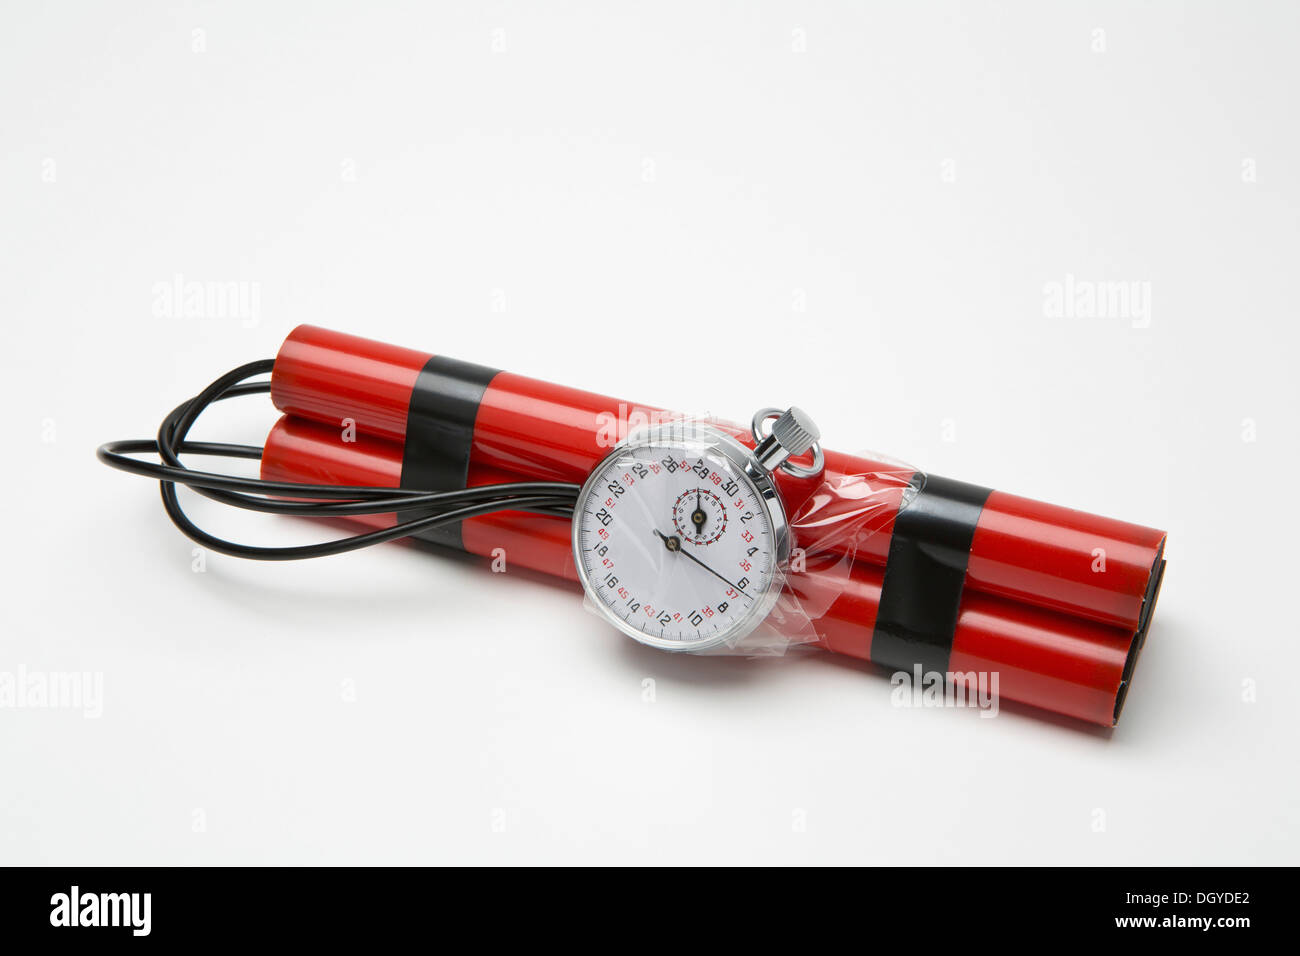 A time bomb made with dynamite and a stopwatch Stock Photo